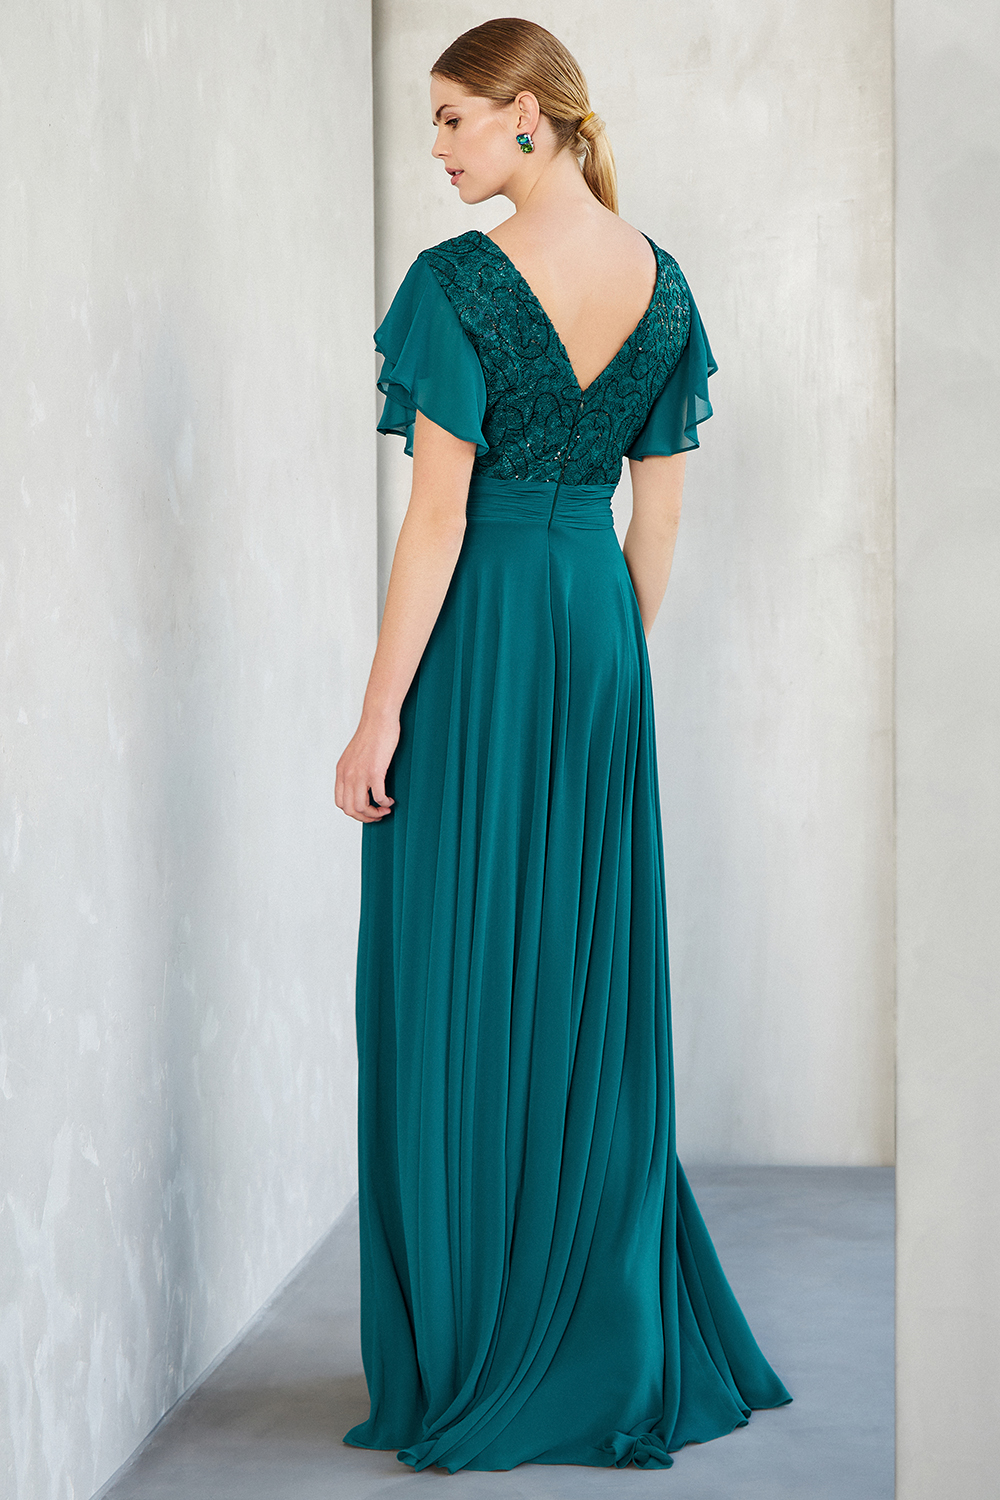 Long evening chiffon dress with lace and beading at the top